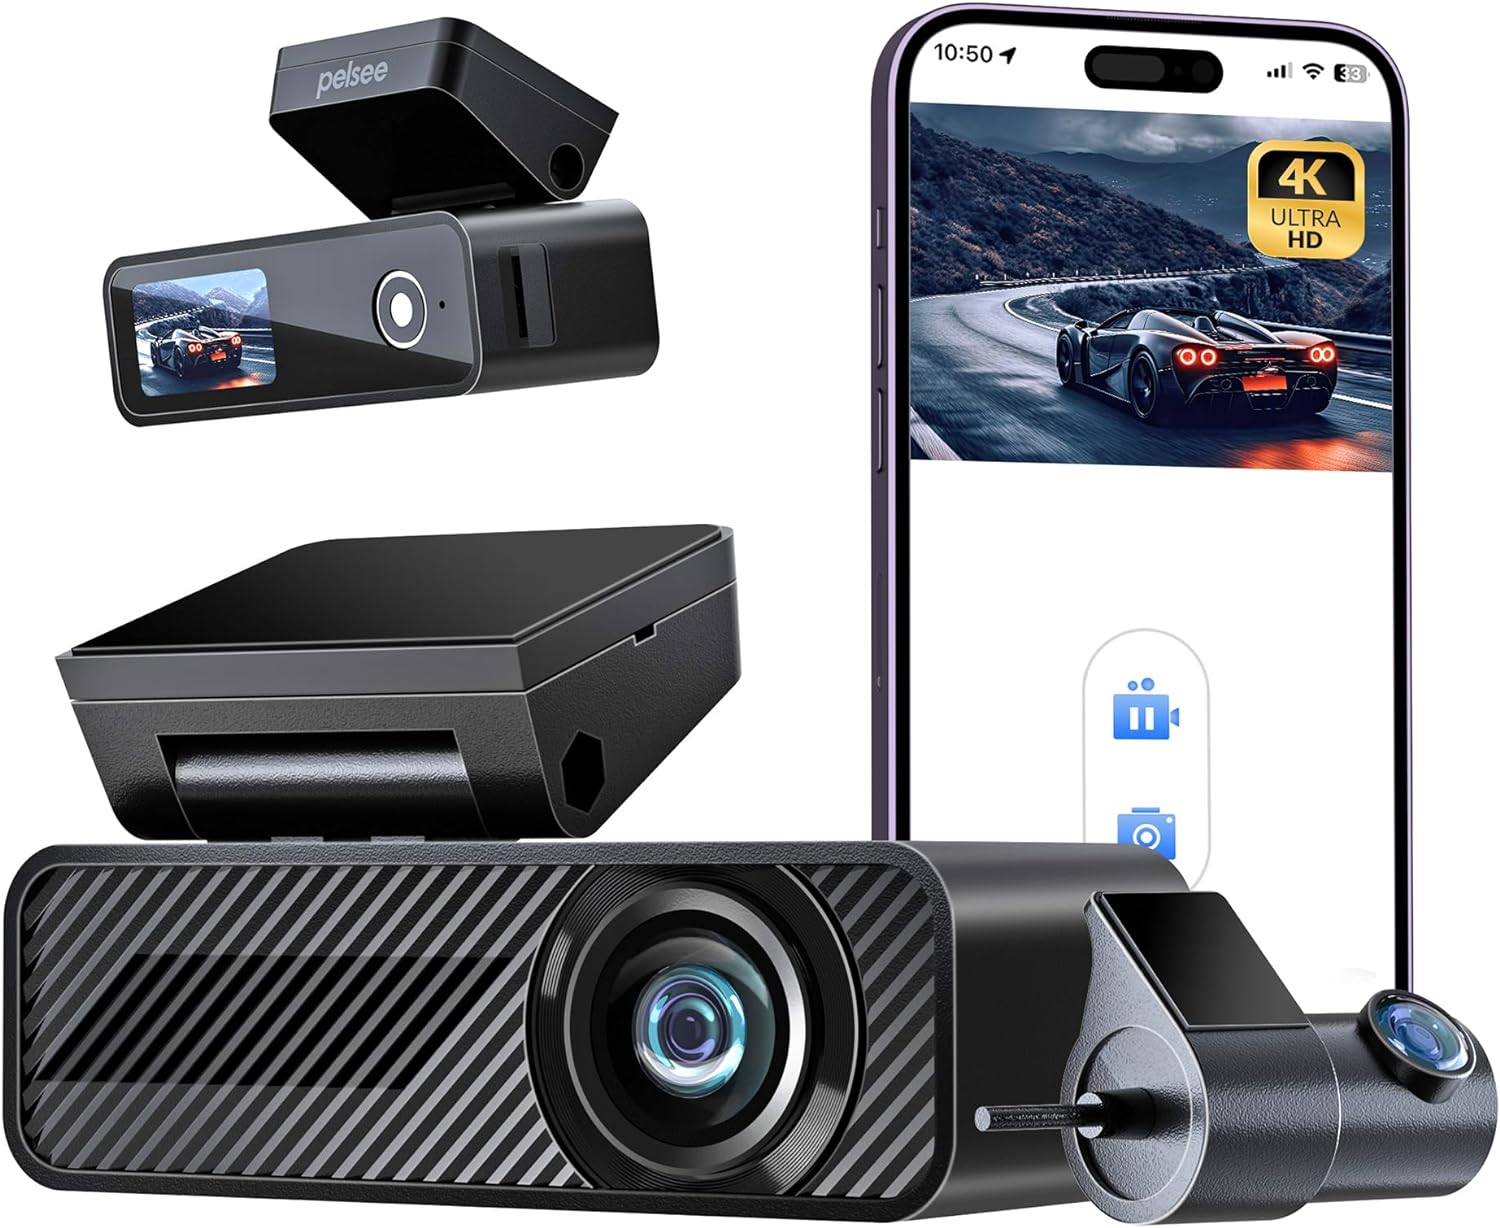 Pelsee P1 Duo Dash Cam: The Ultimate Front and Rear Dash Camera Combo